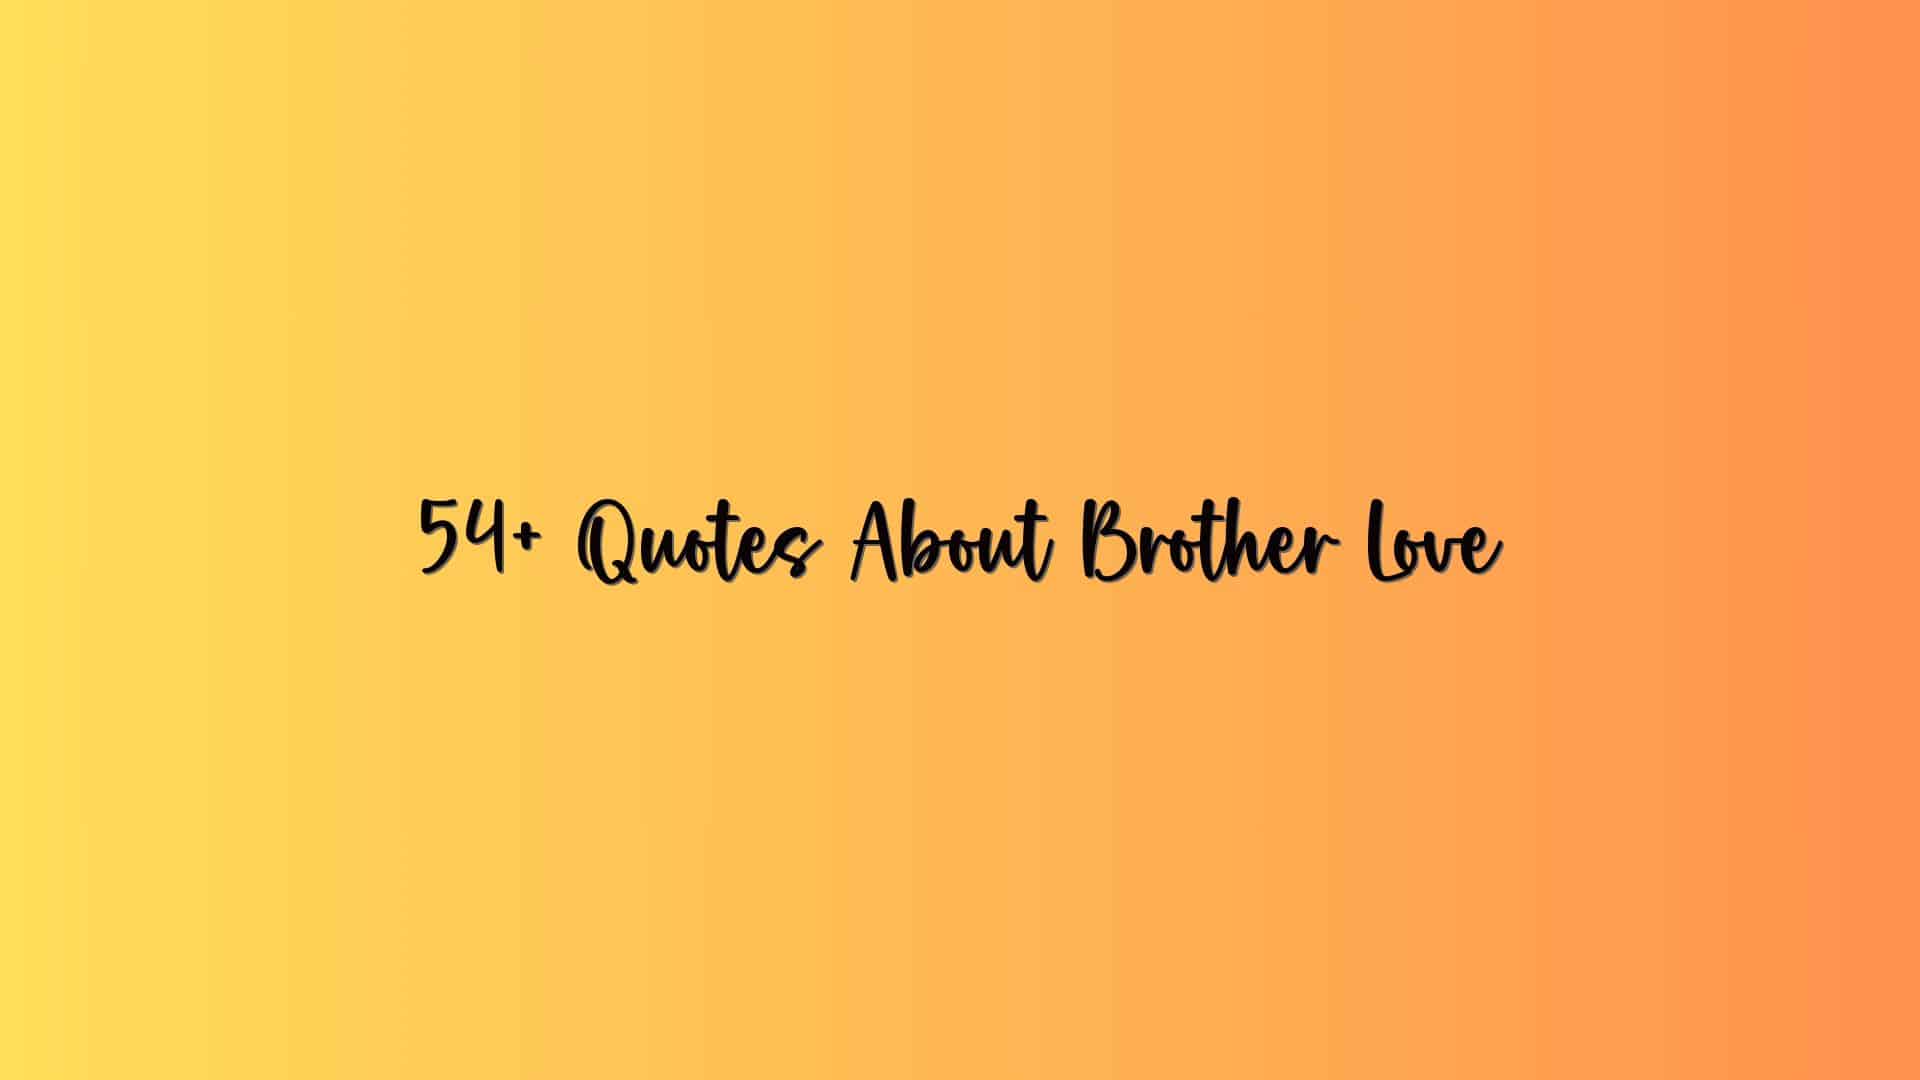 54+ Quotes About Brother Love